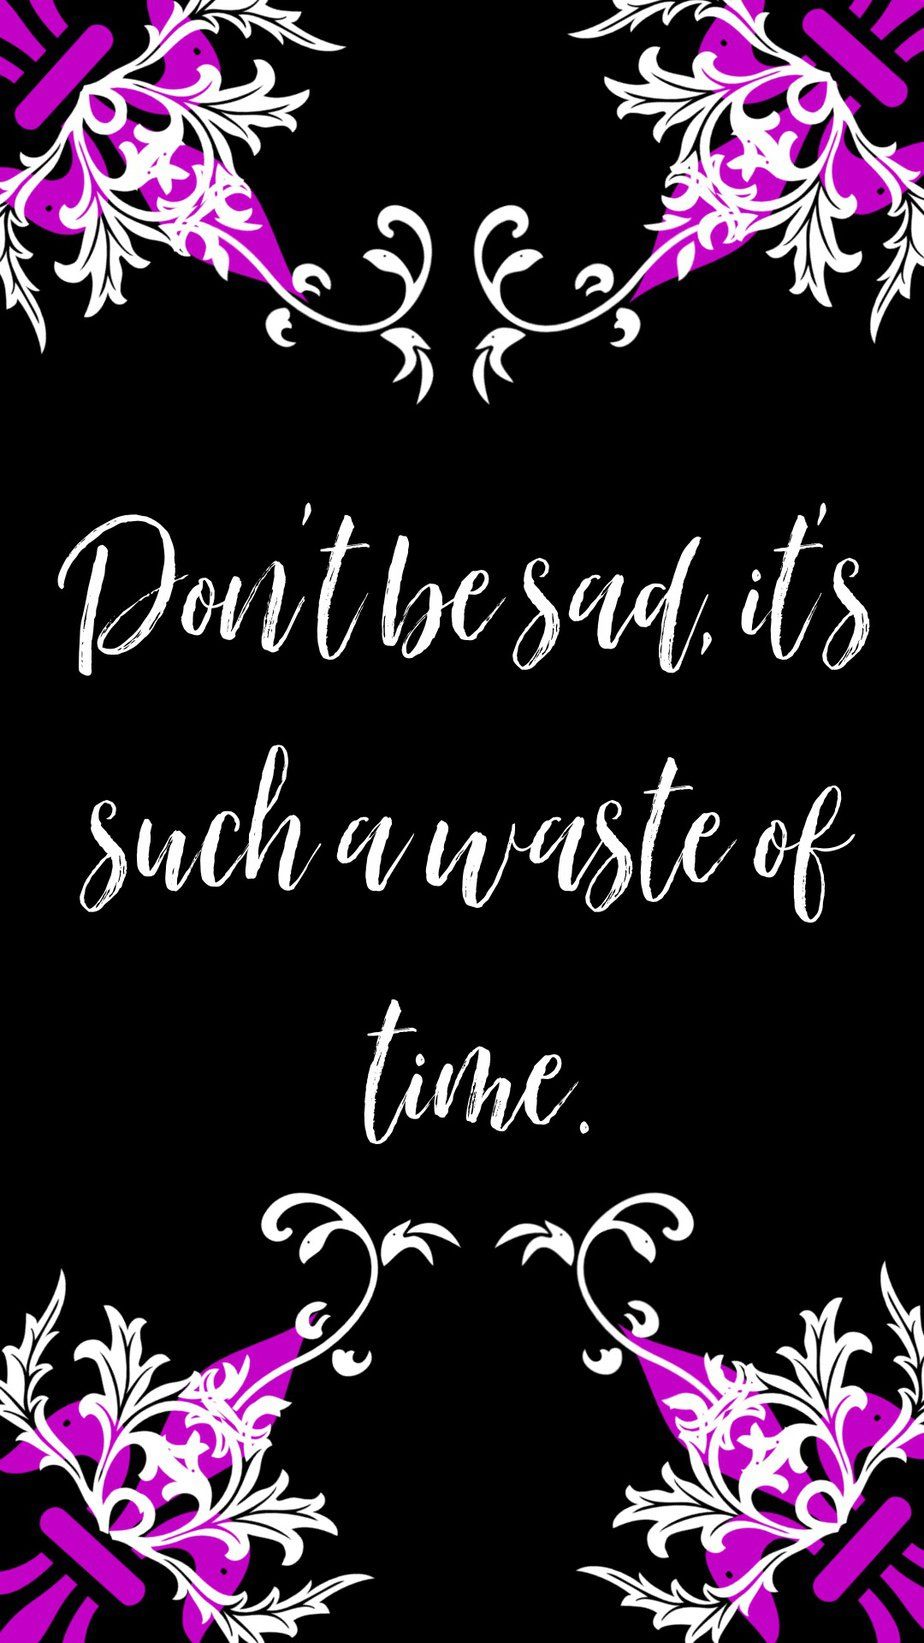 Don't be sad, it's such a waste of time. - Sad quotes